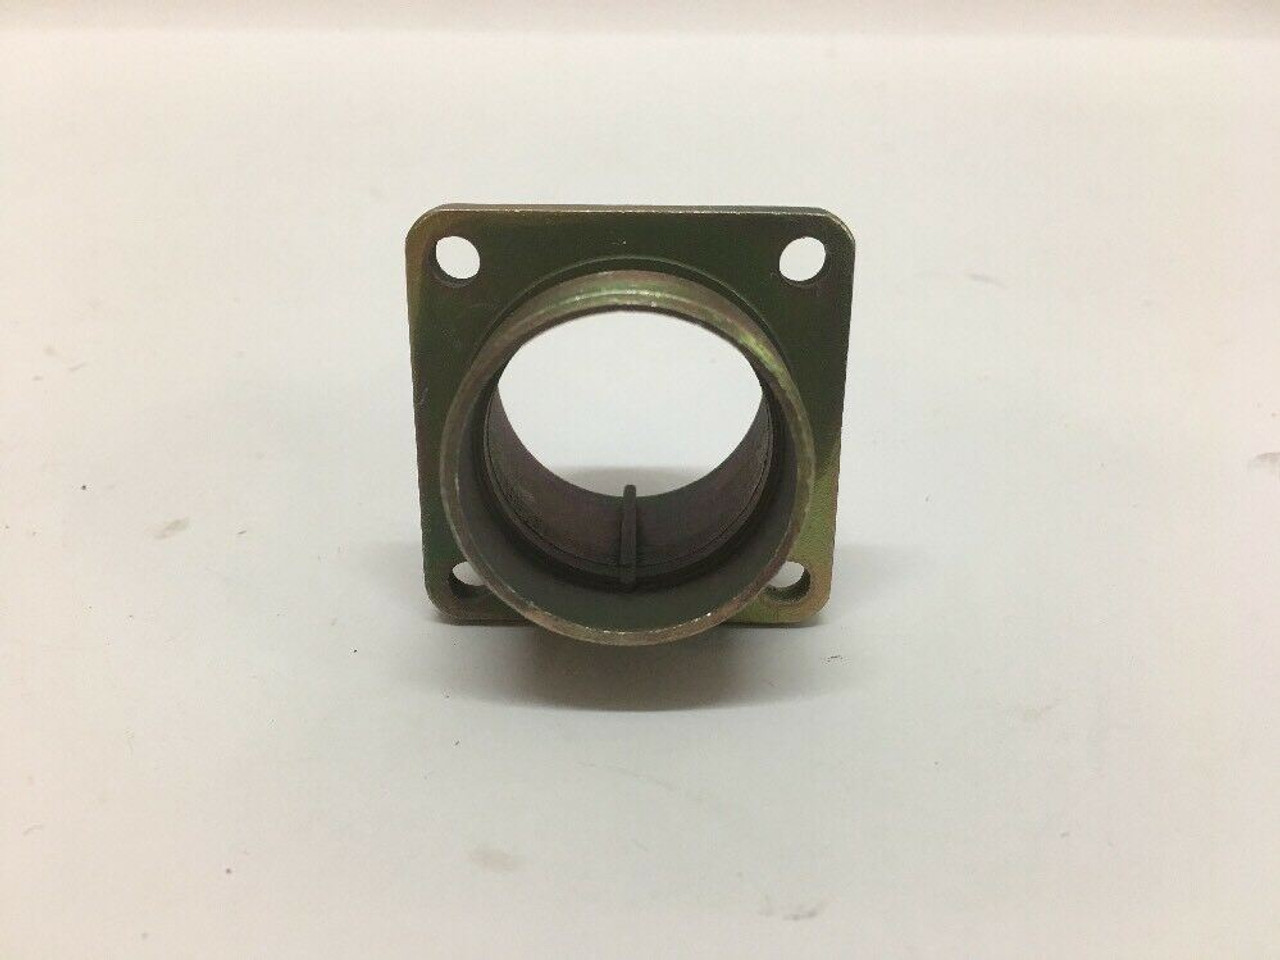 Electrical Connector Shell 8701329 Tiem Engineering  